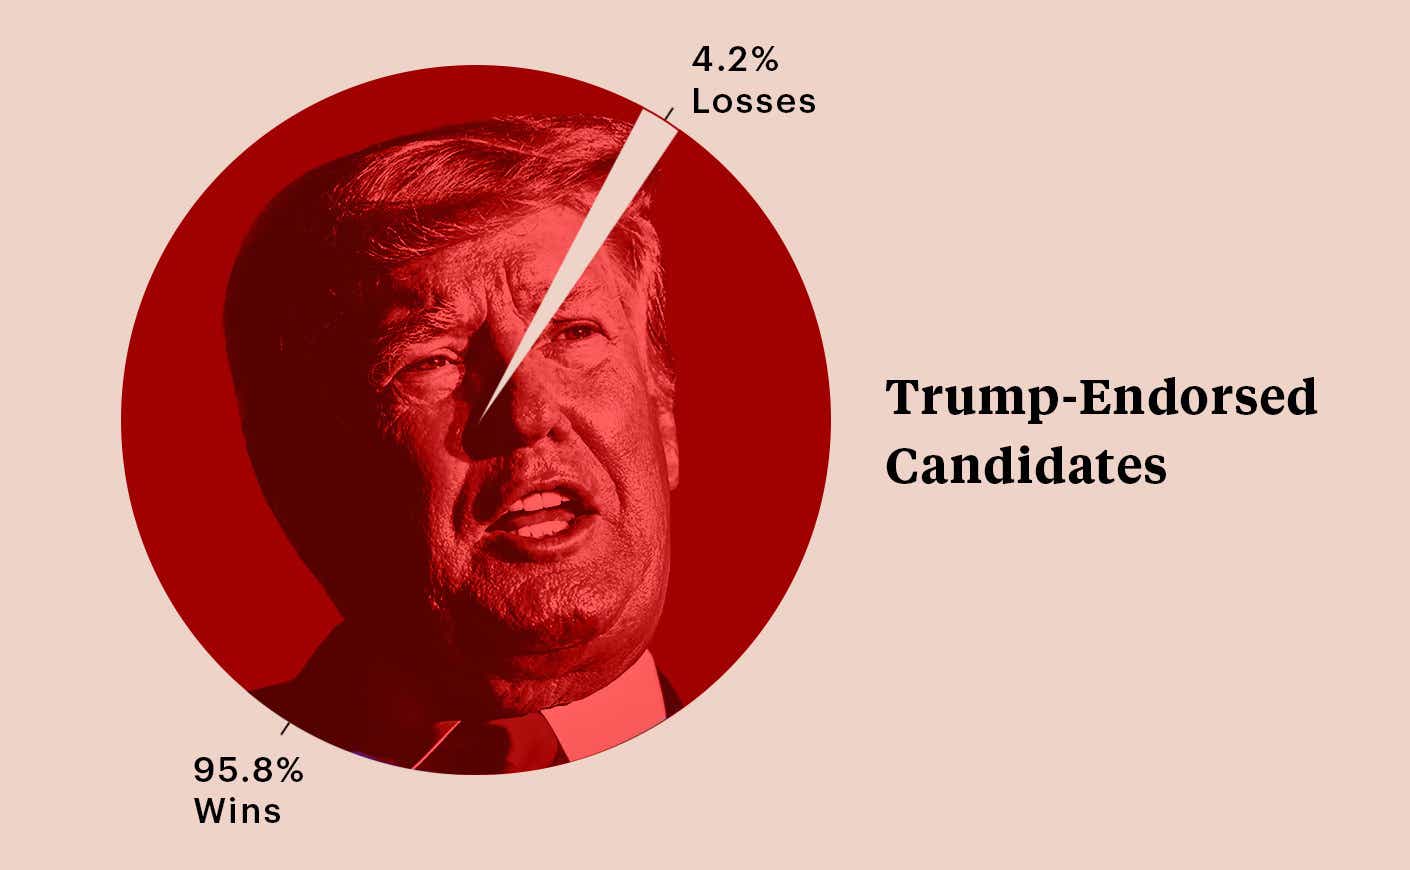 donald trump in the center of a pie chart